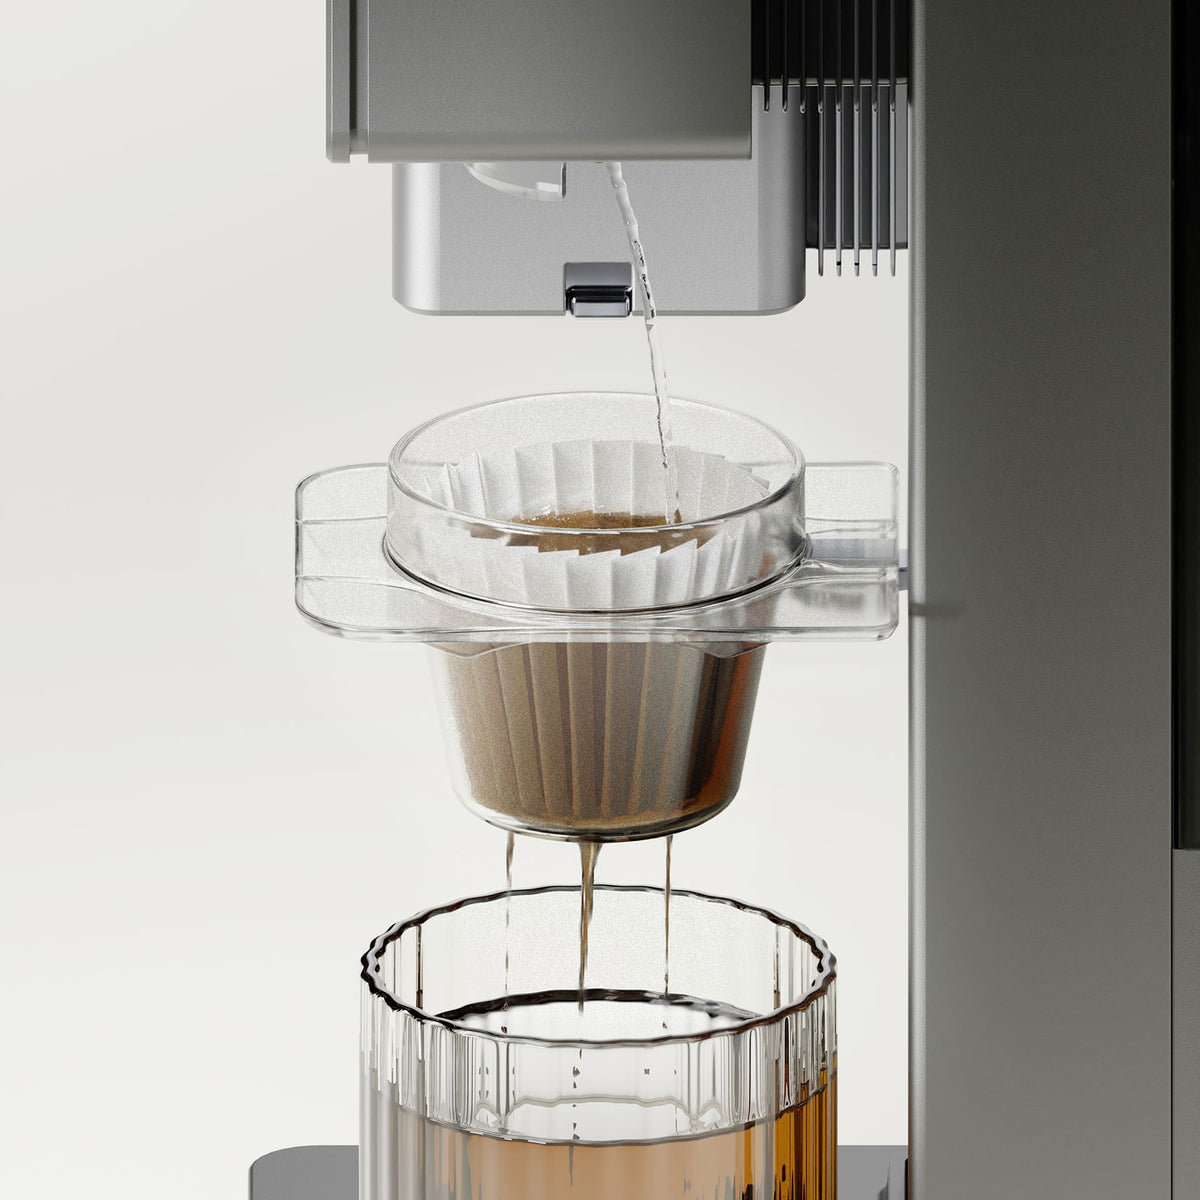 SOLD] XBloom automated pourover machine - Buy/Sell